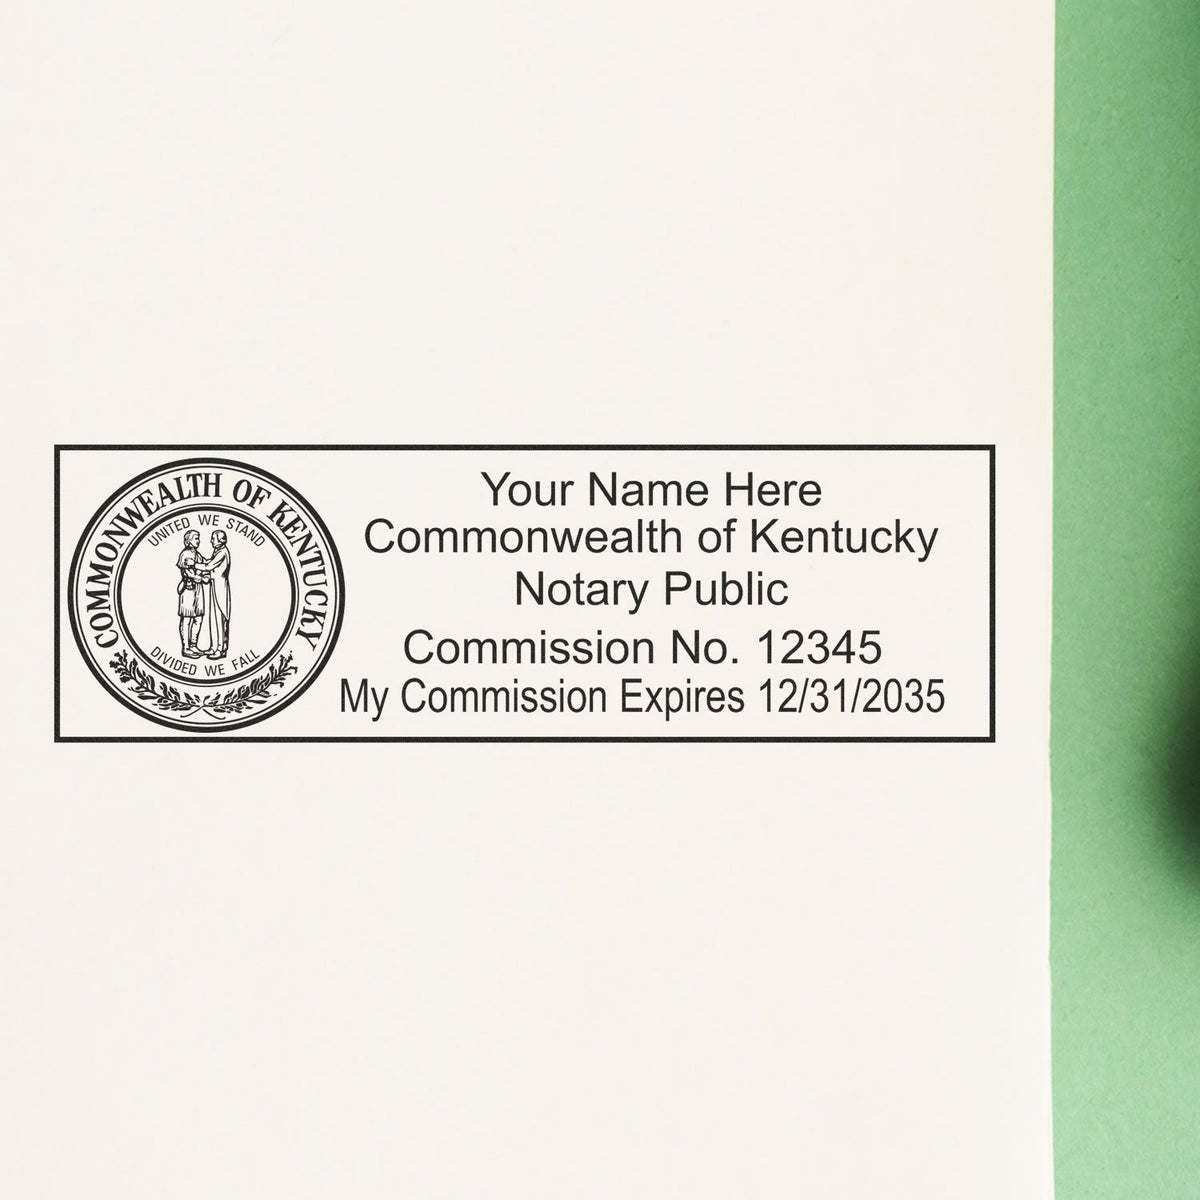 This paper is stamped with a sample imprint of the Super Slim Kentucky Notary Public Stamp, signifying its quality and reliability.